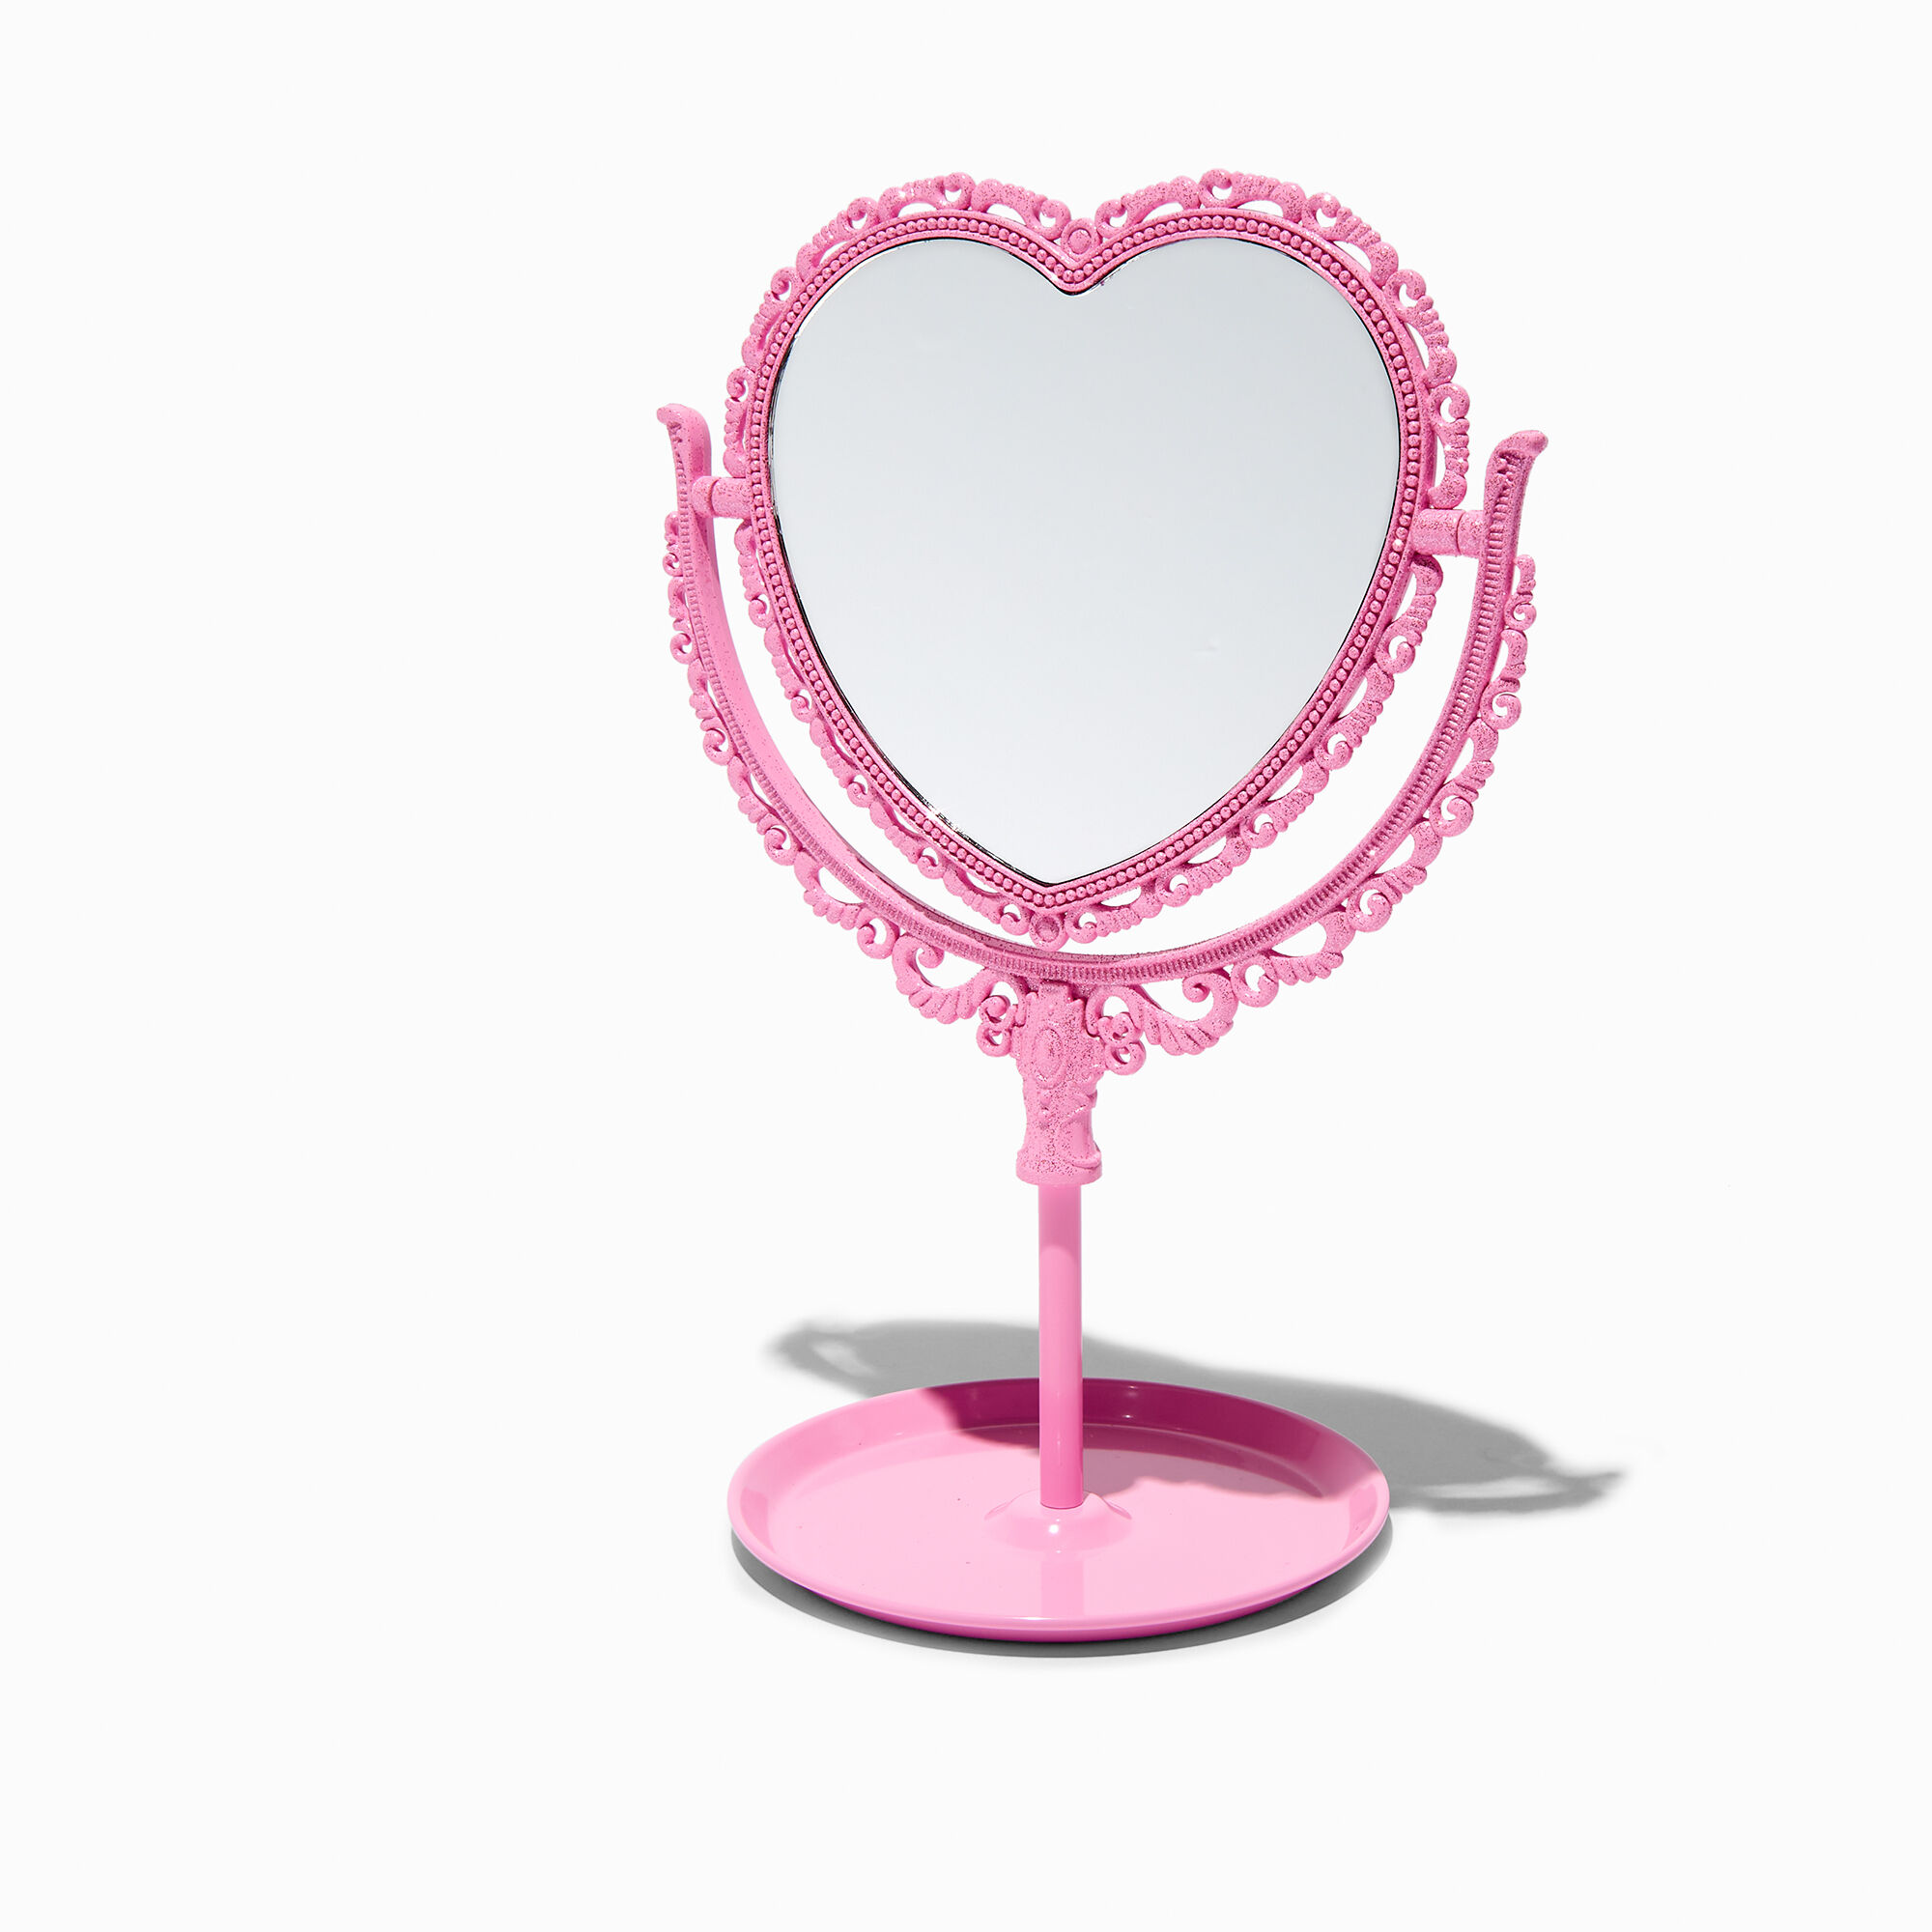 View Claires HeartShaped Tabletop Mirror Pink information